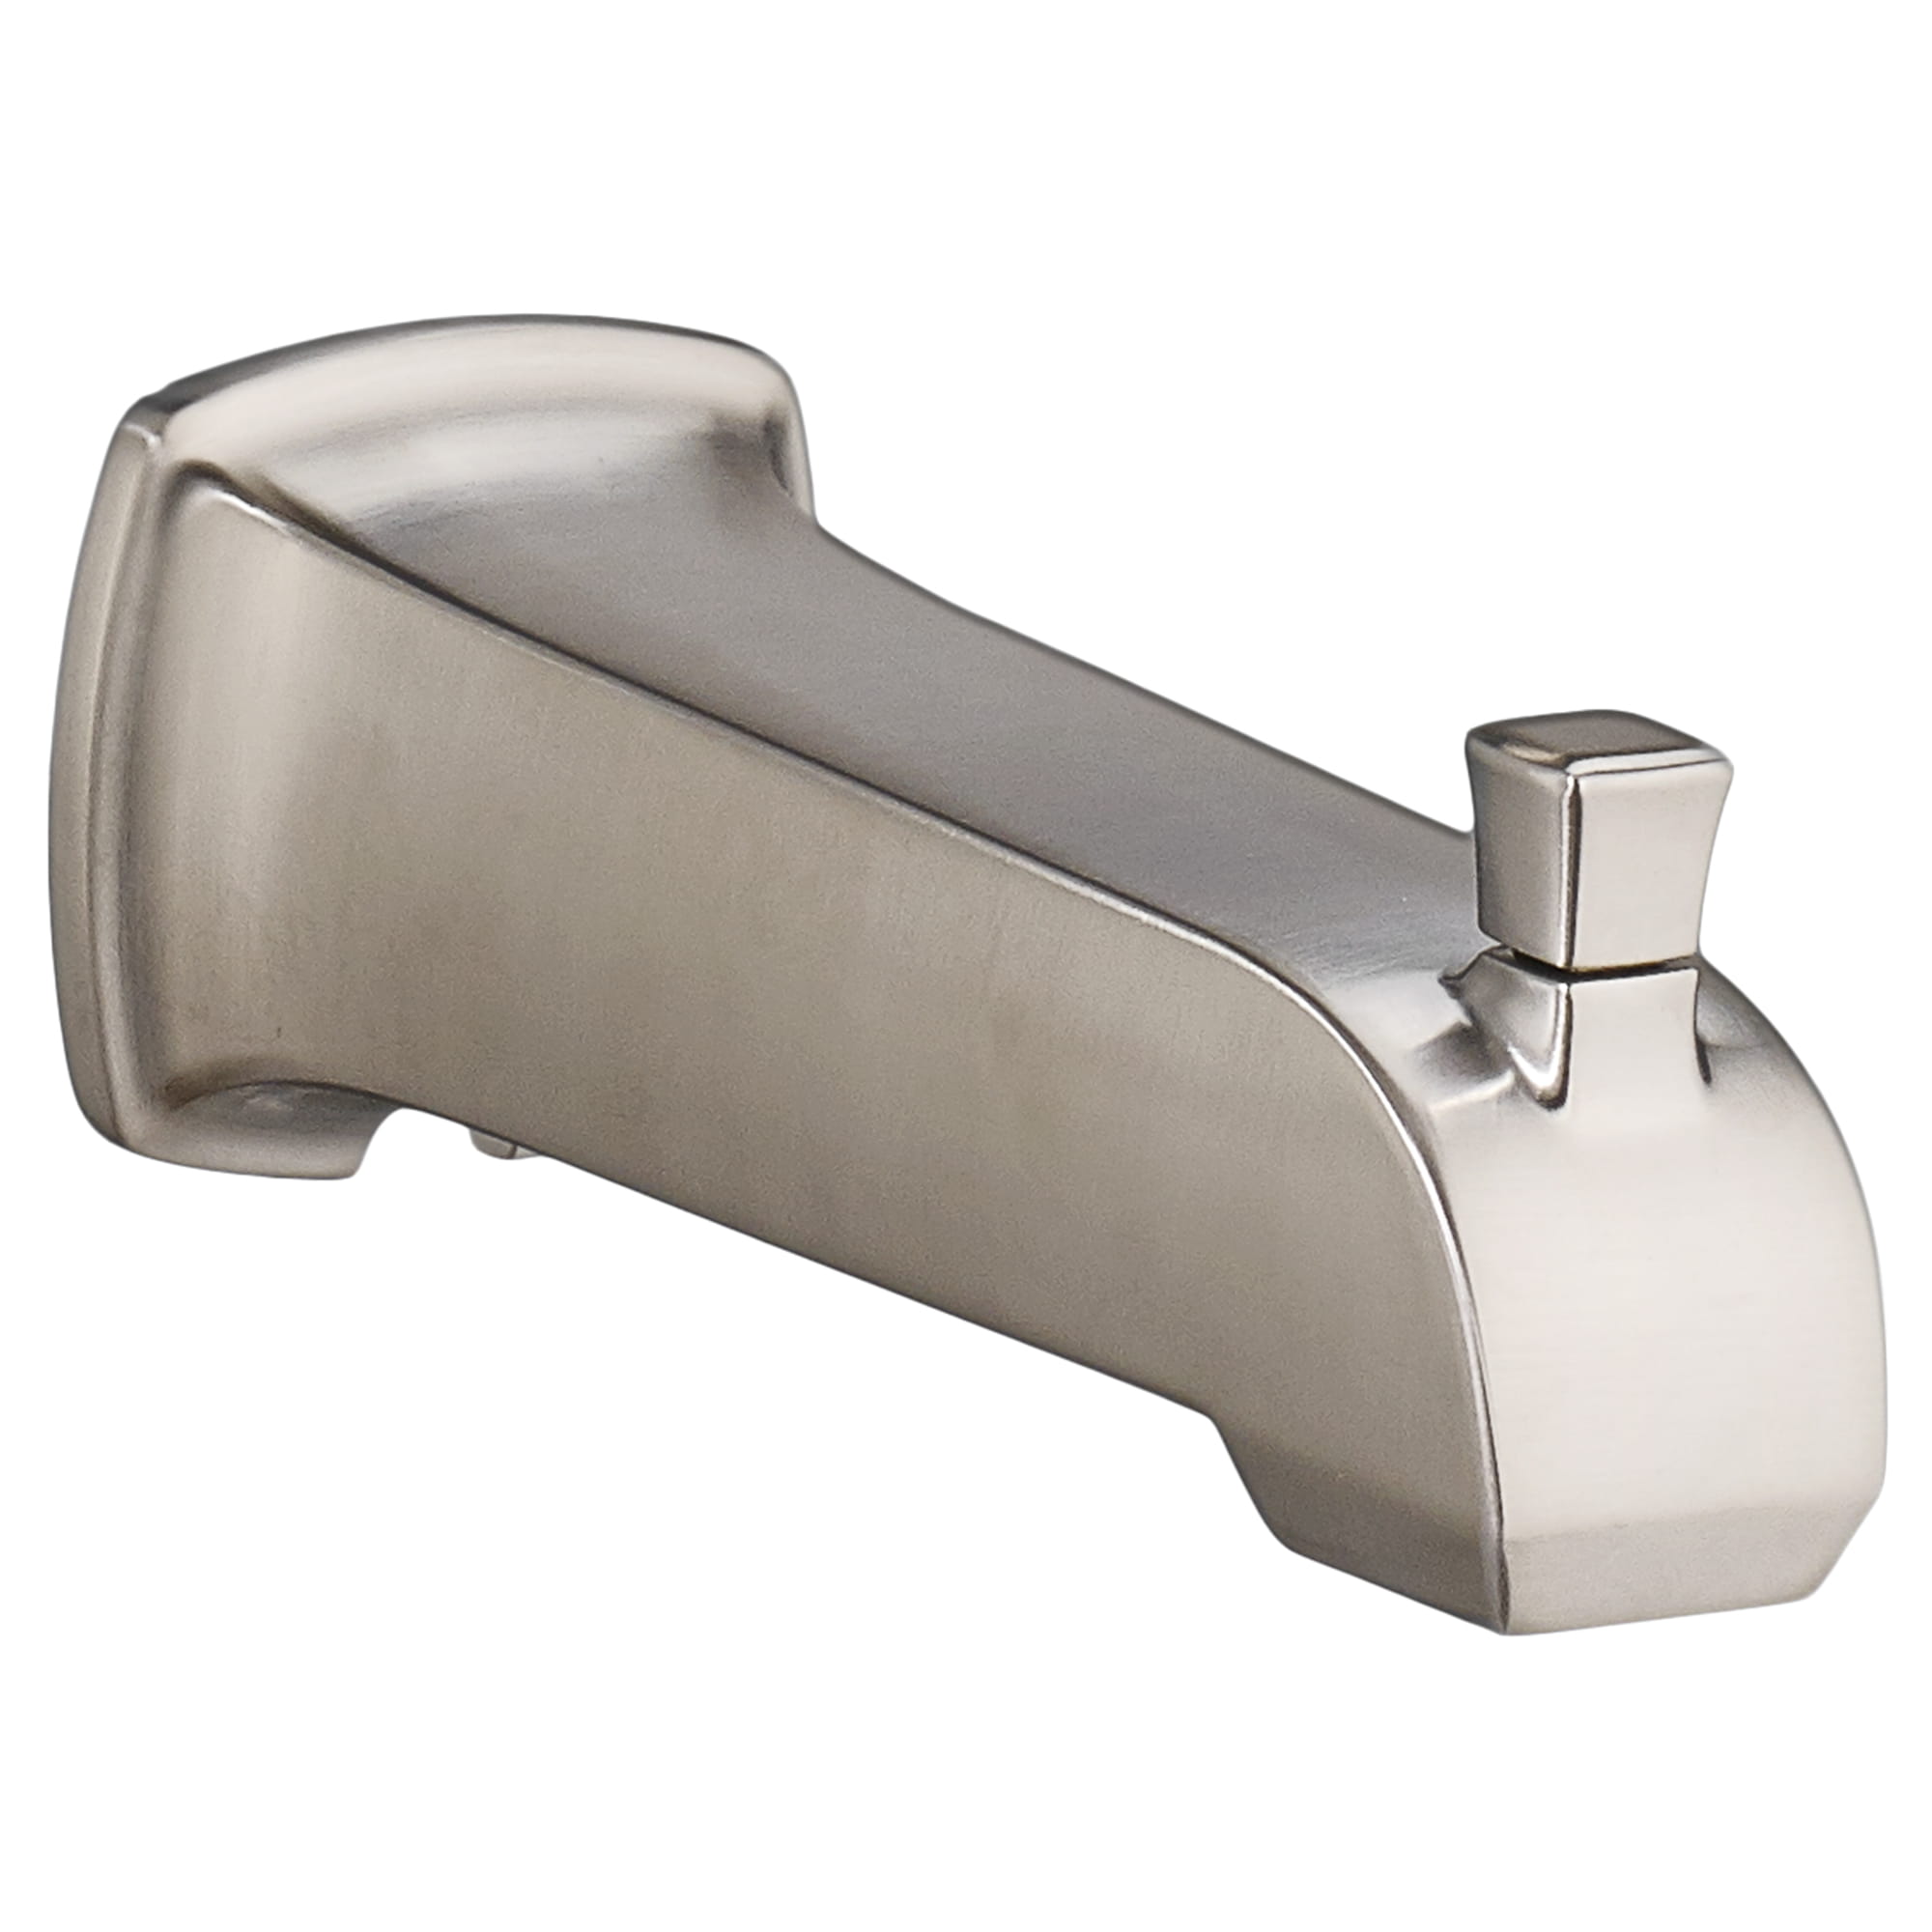 Townsend® 6-1/2-Inch IPS Diverter Tub Spout